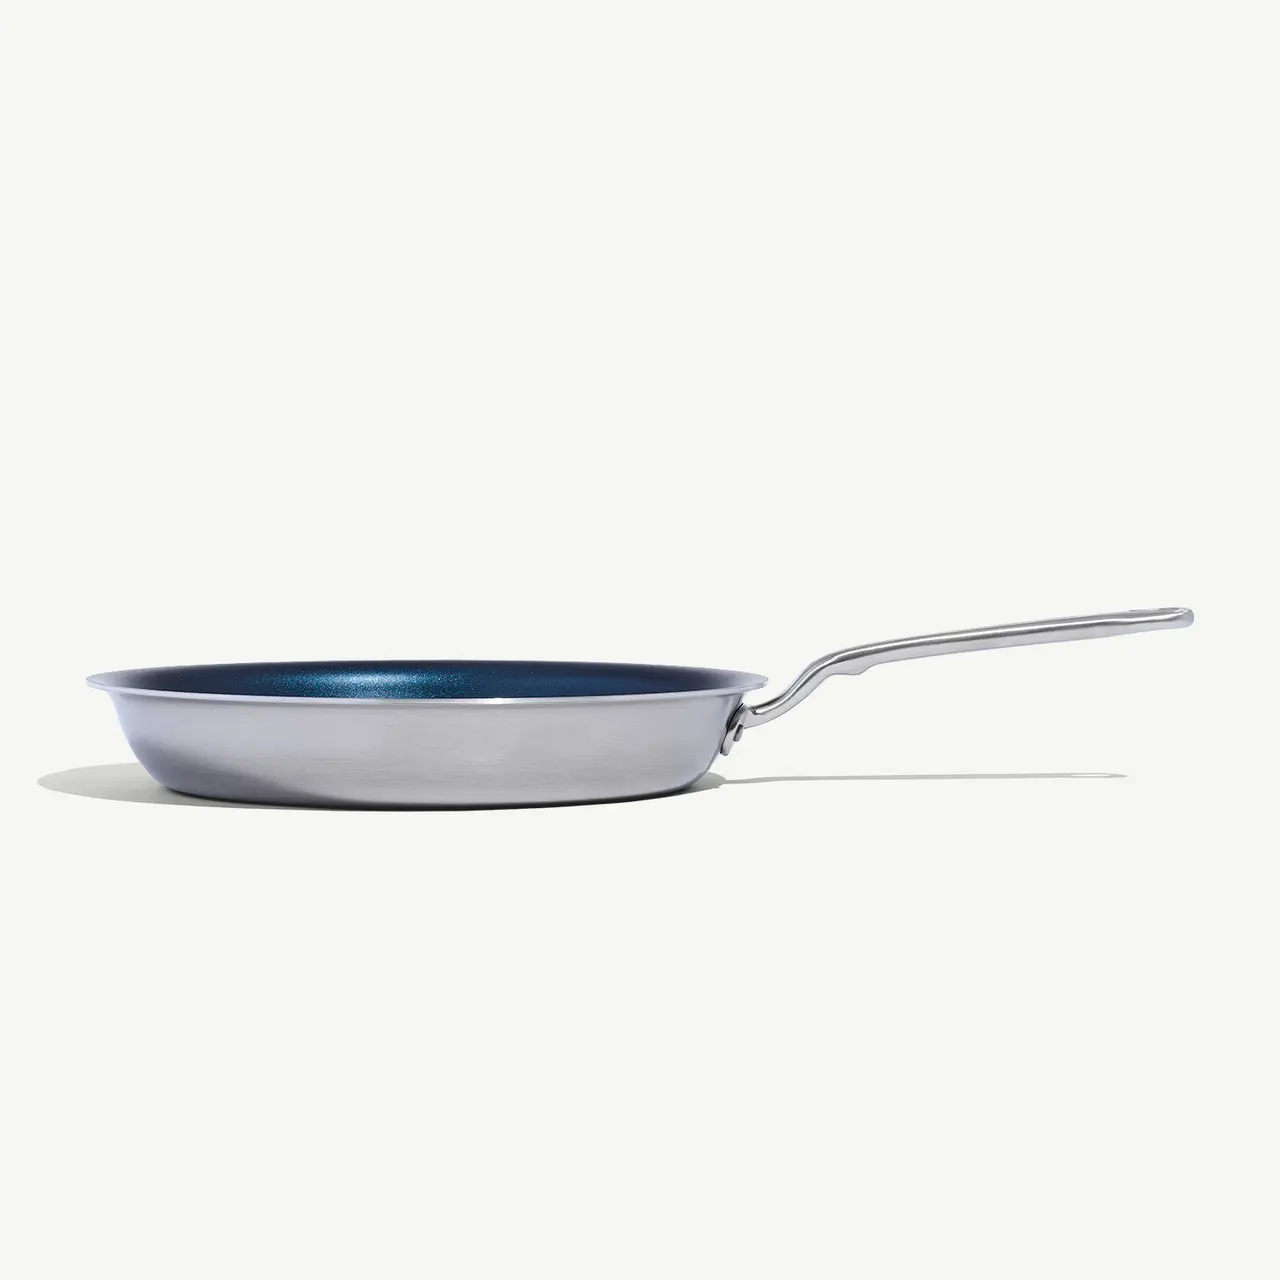 A stainless steel frying pan with a blue interior sits on a plain white background.